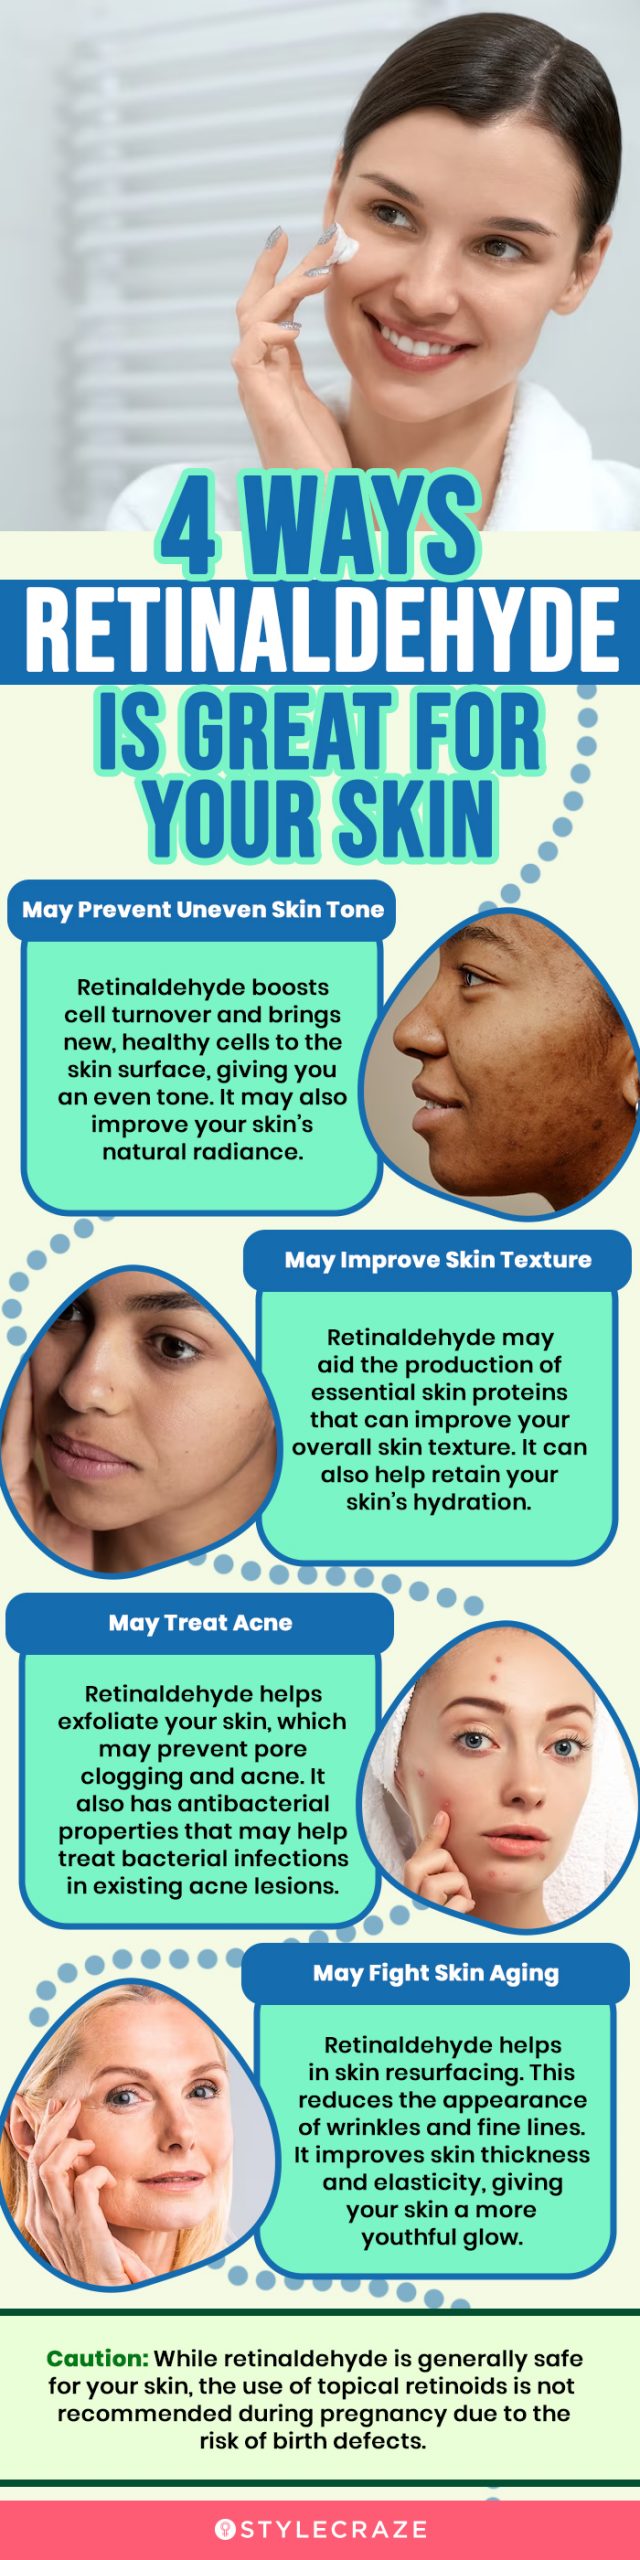 4 ways retinaldehyde is great for your skin (infographic)